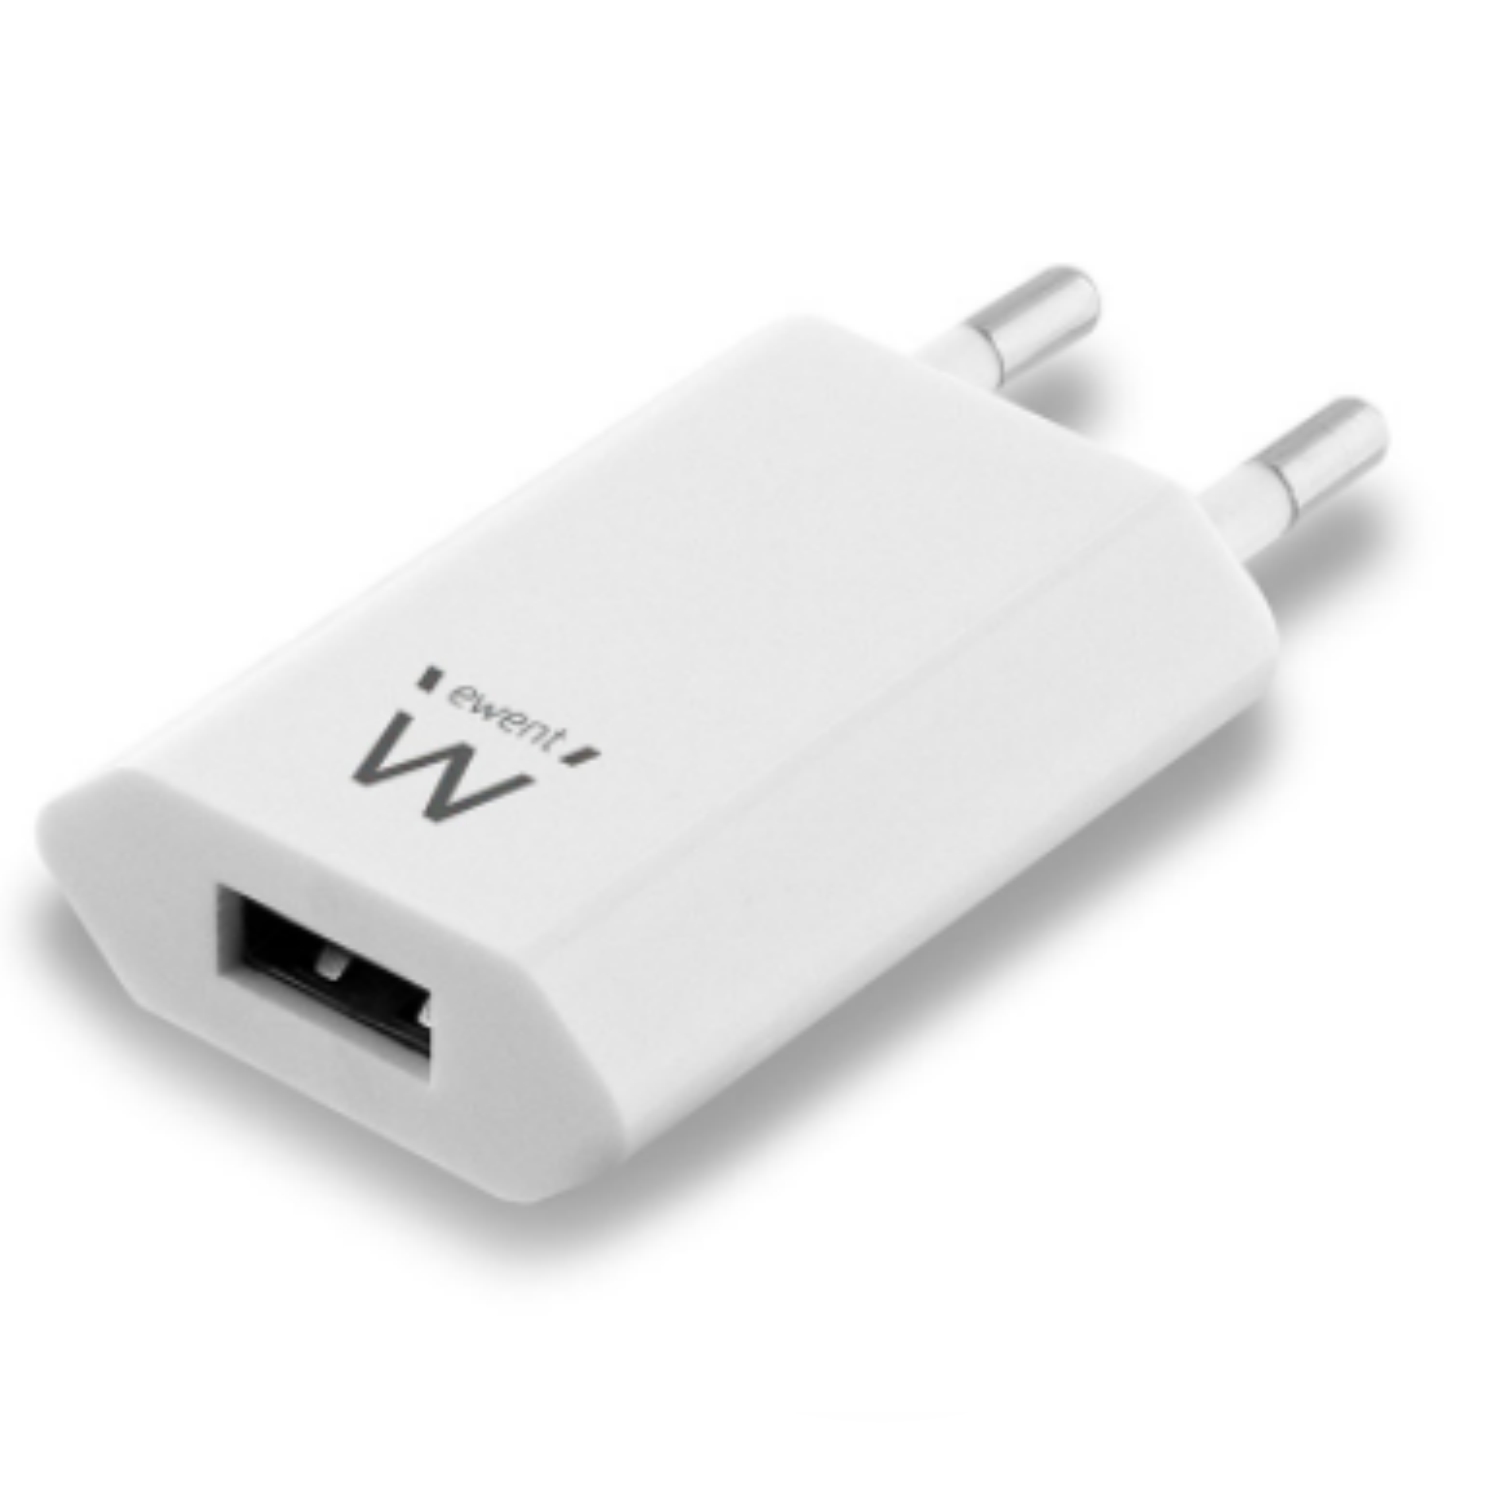 USB Adapter/Charger 1 port 5V / 1A (AC2105)